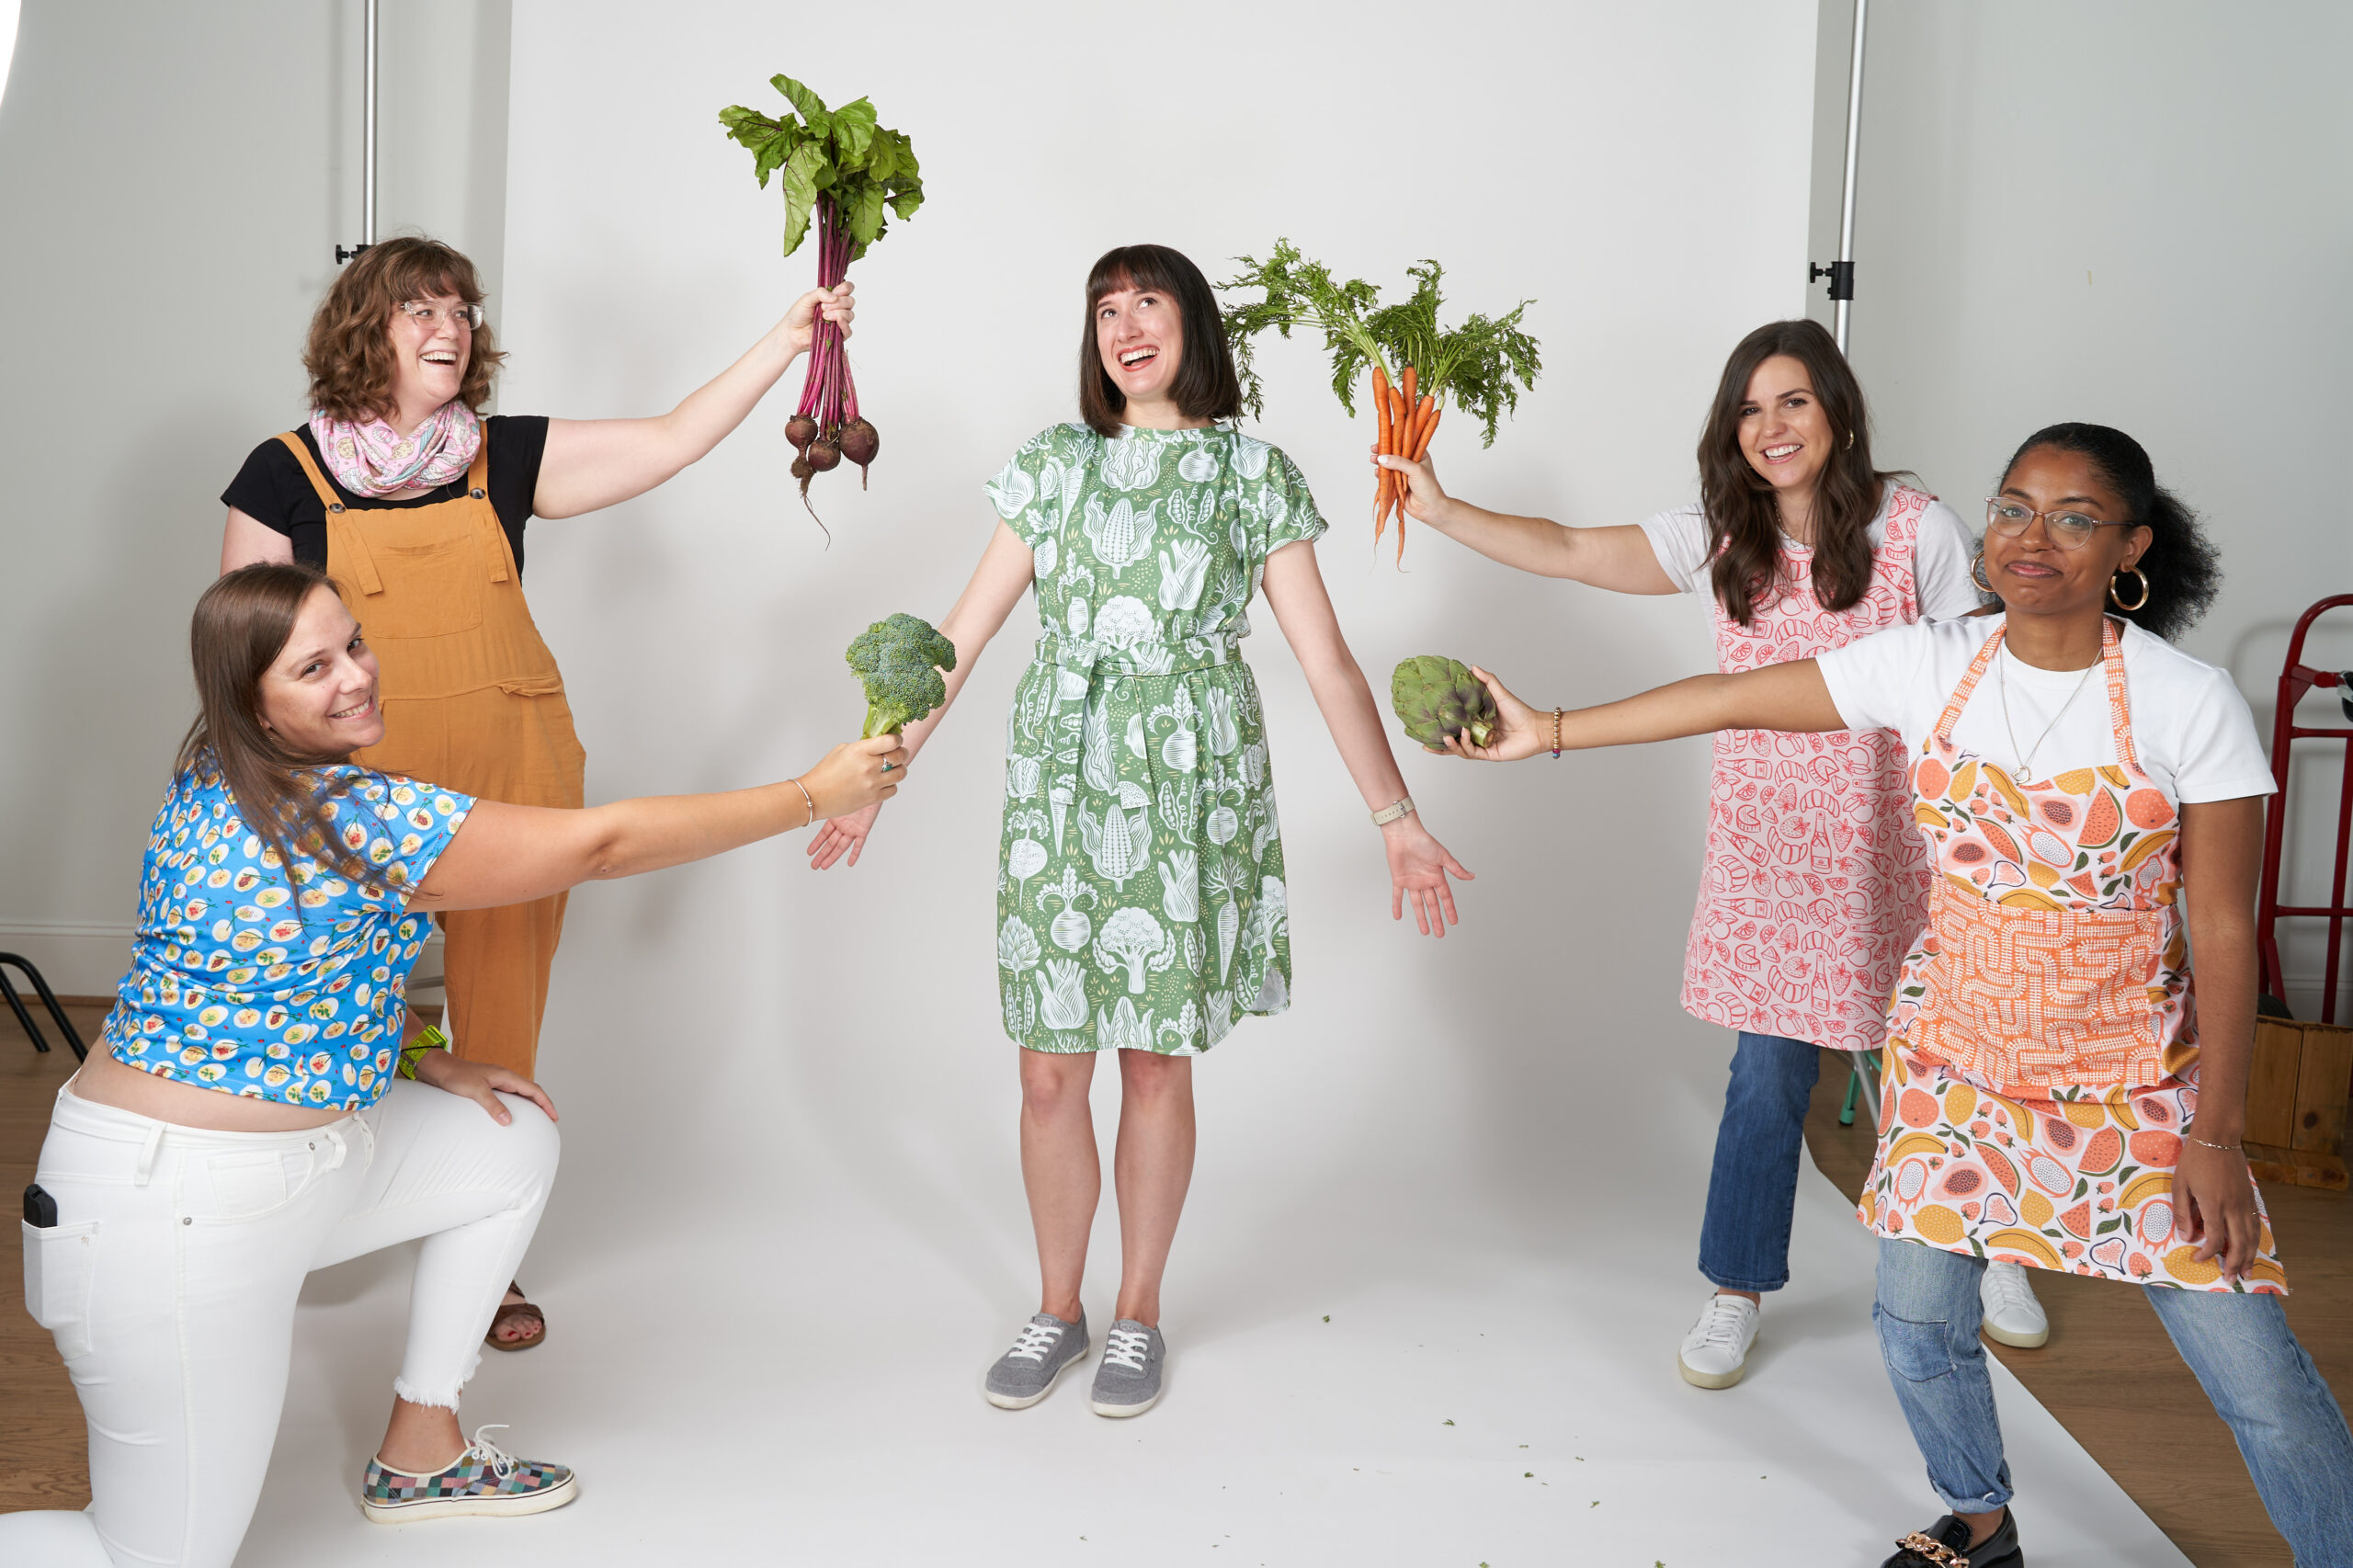 A group of women stand in front of a white back drop in a photo studio holding up various vegetables around a woman in the center wearing a vegetable dress